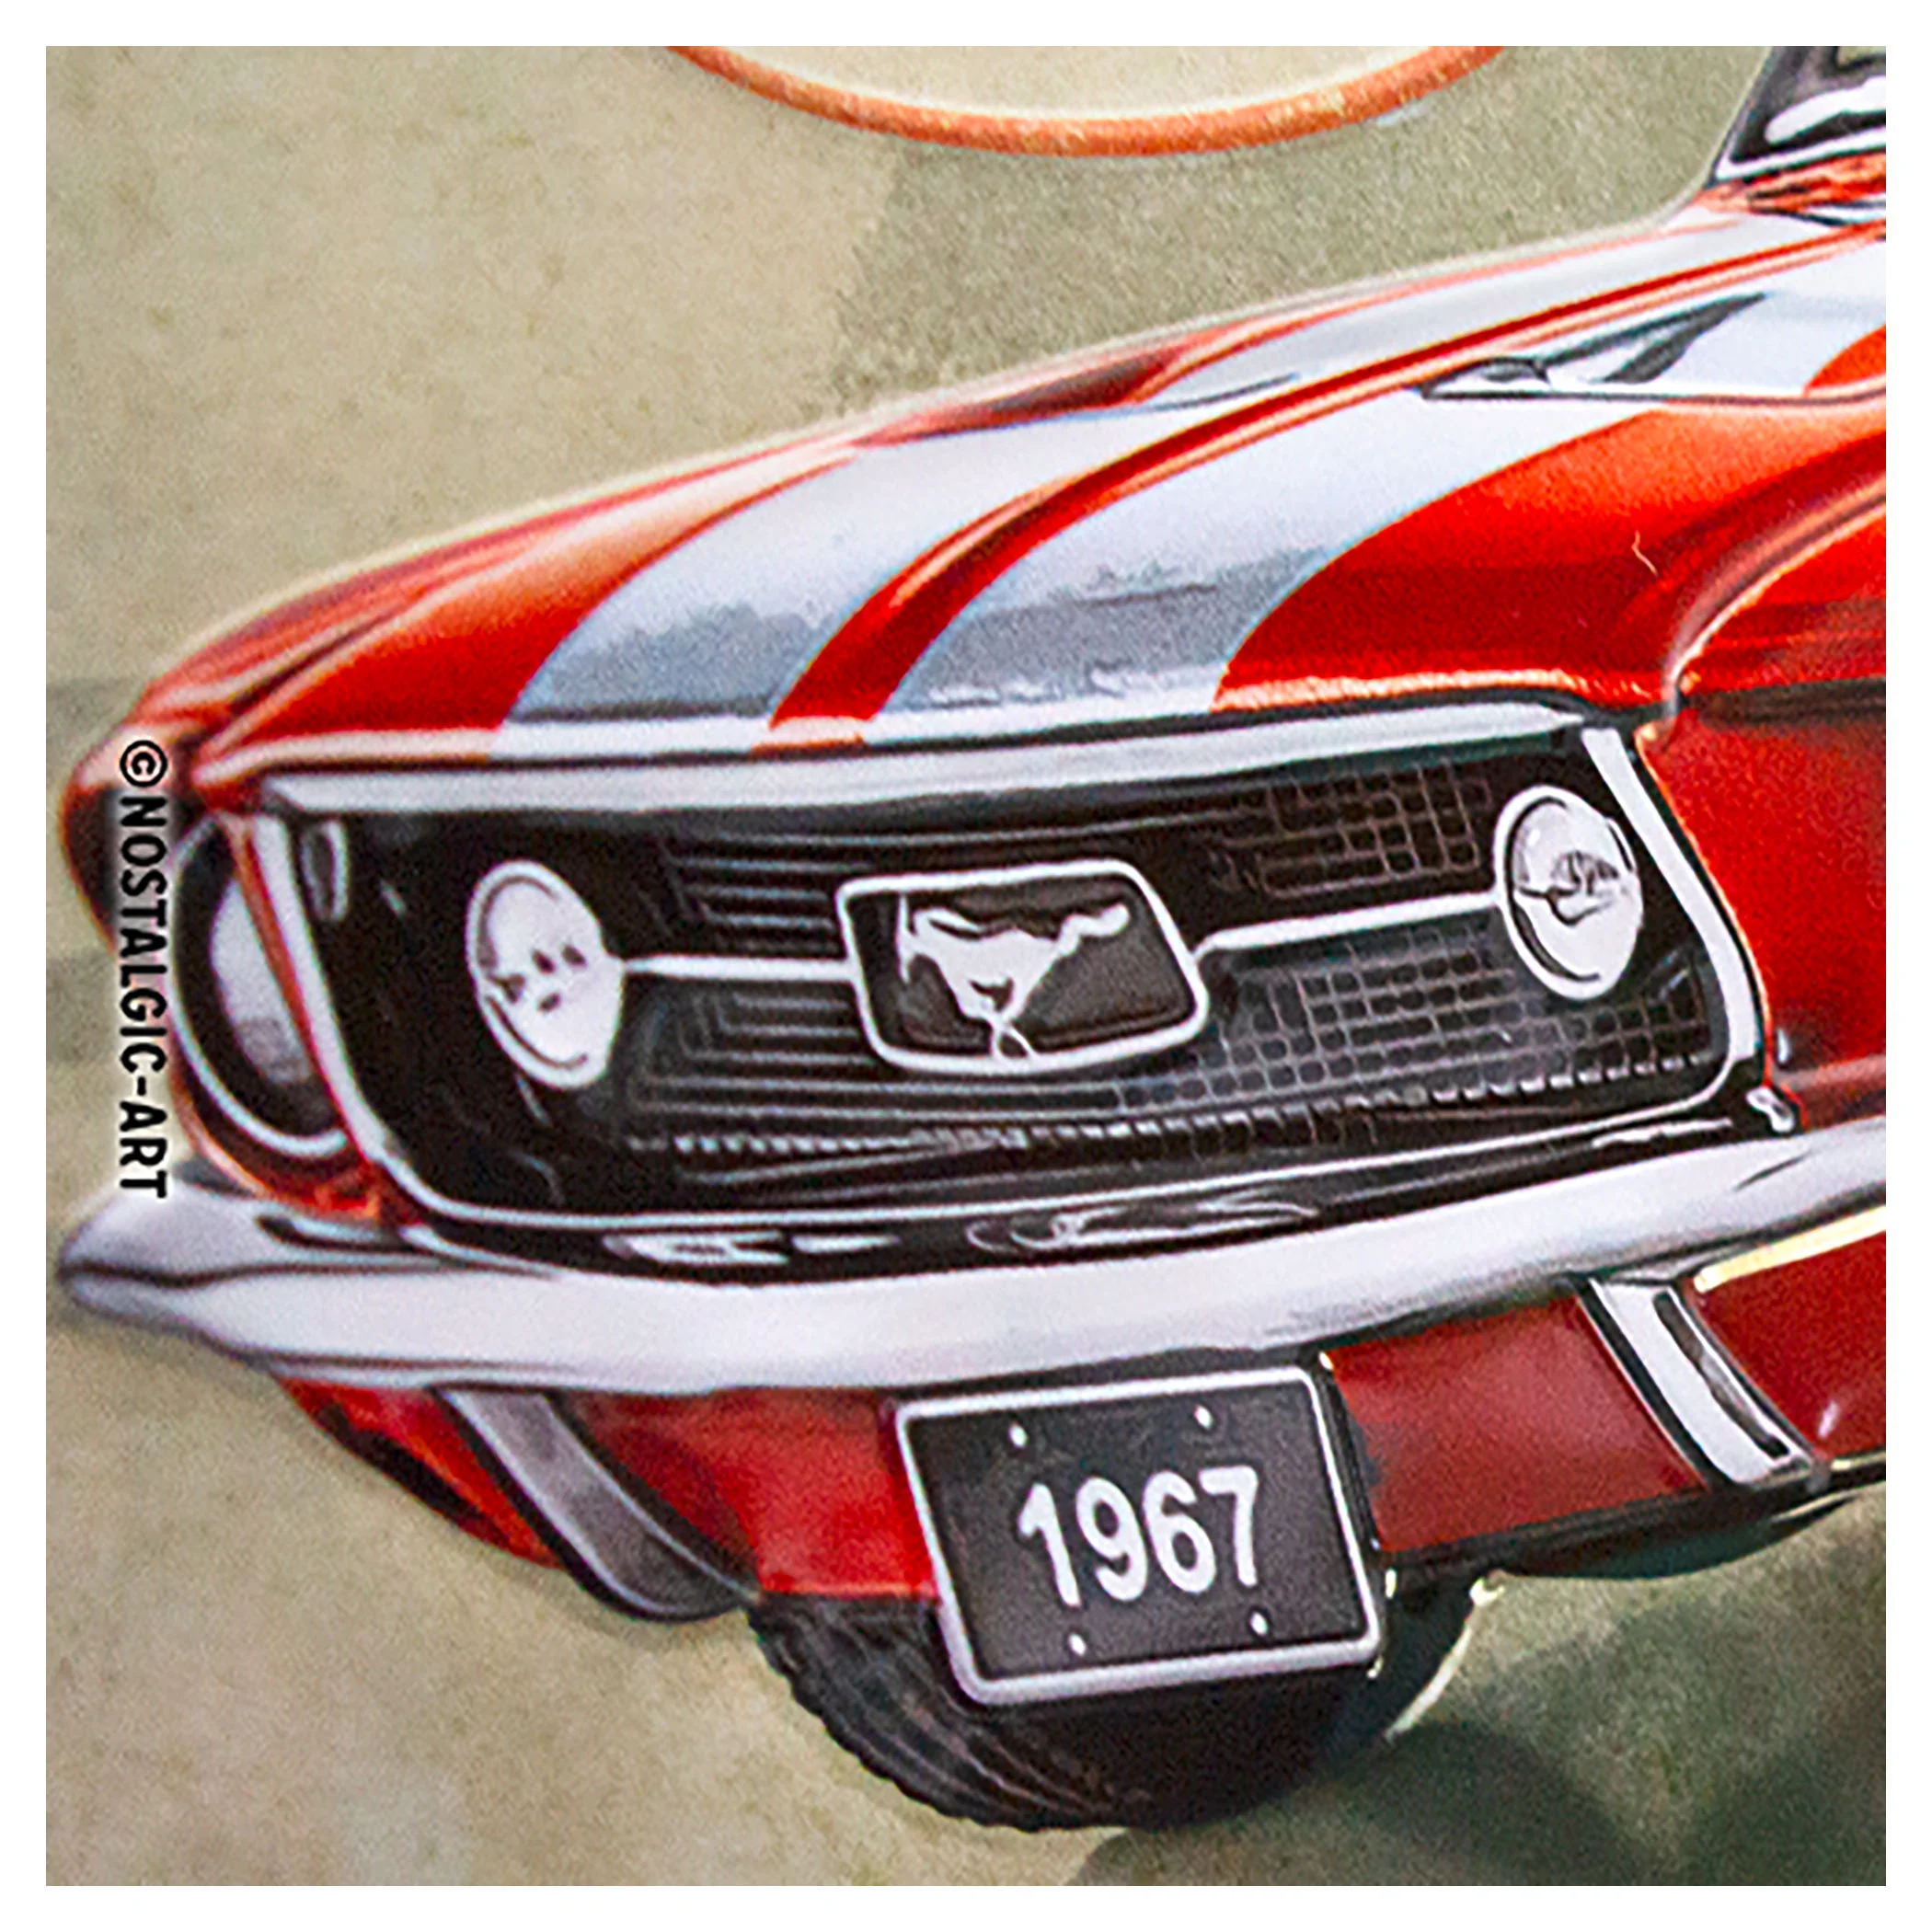 FORD MUSTANG METAL SIGN